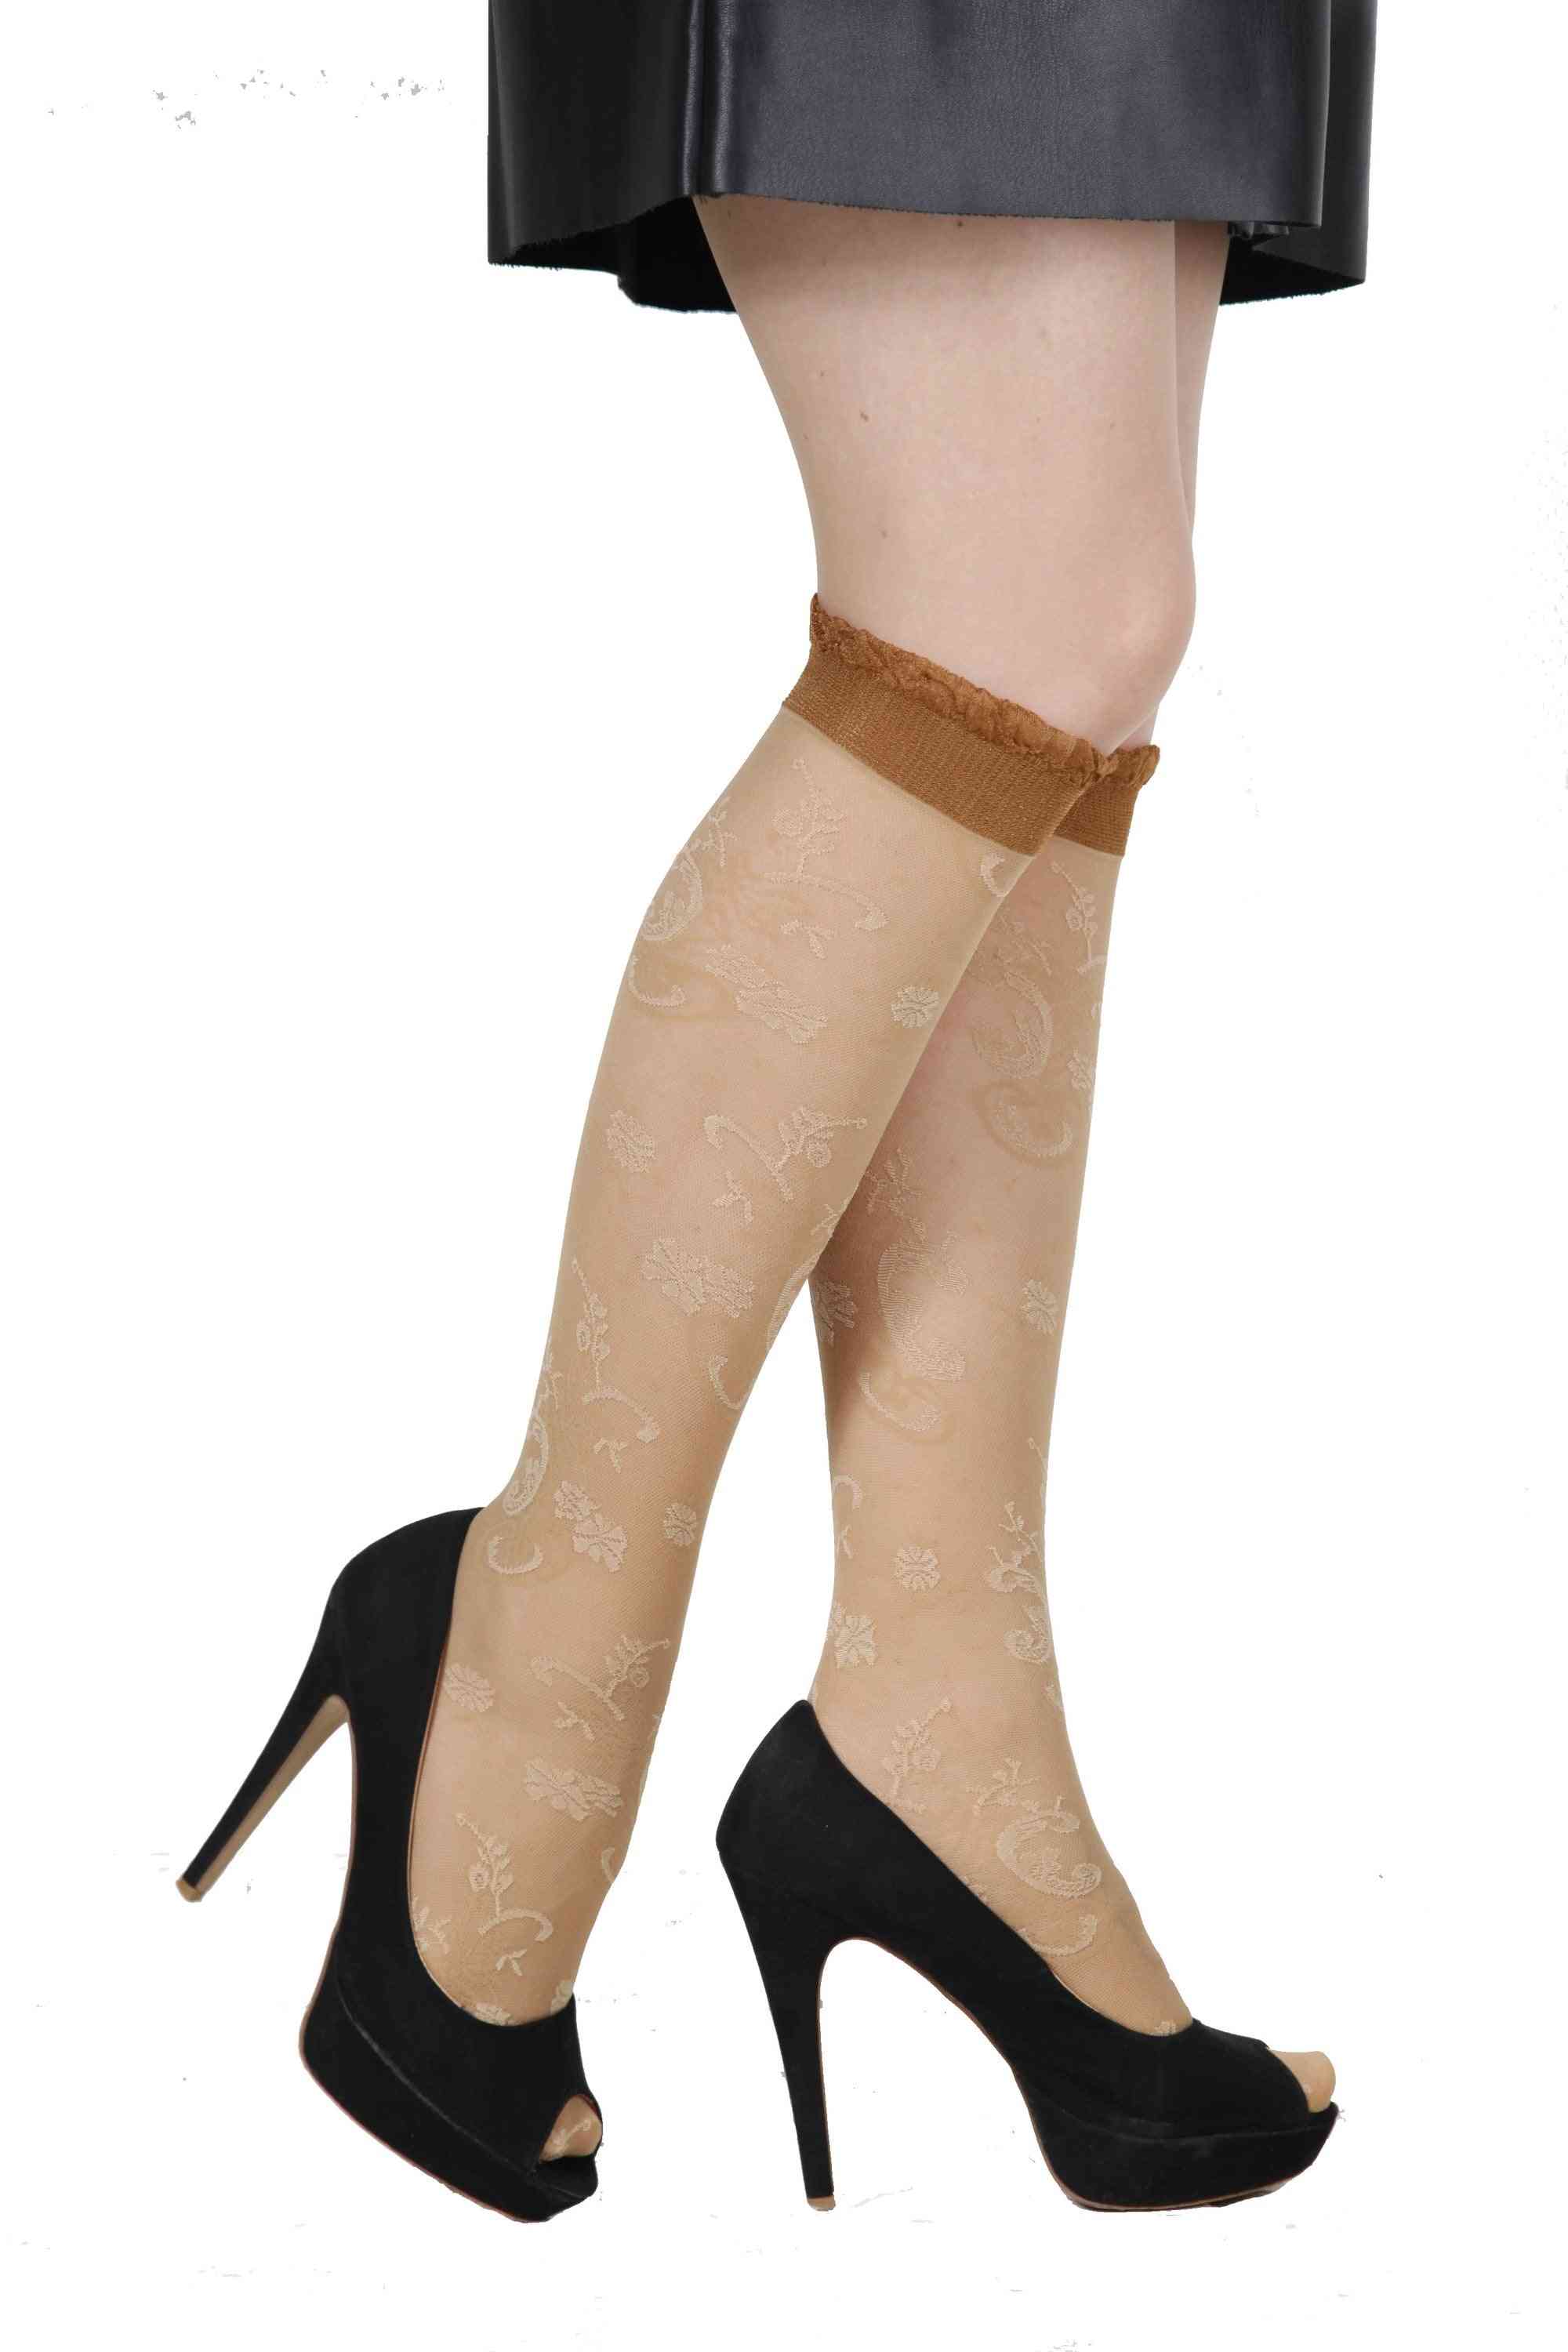 Floral Pattern Knee Highs Stockings For Women